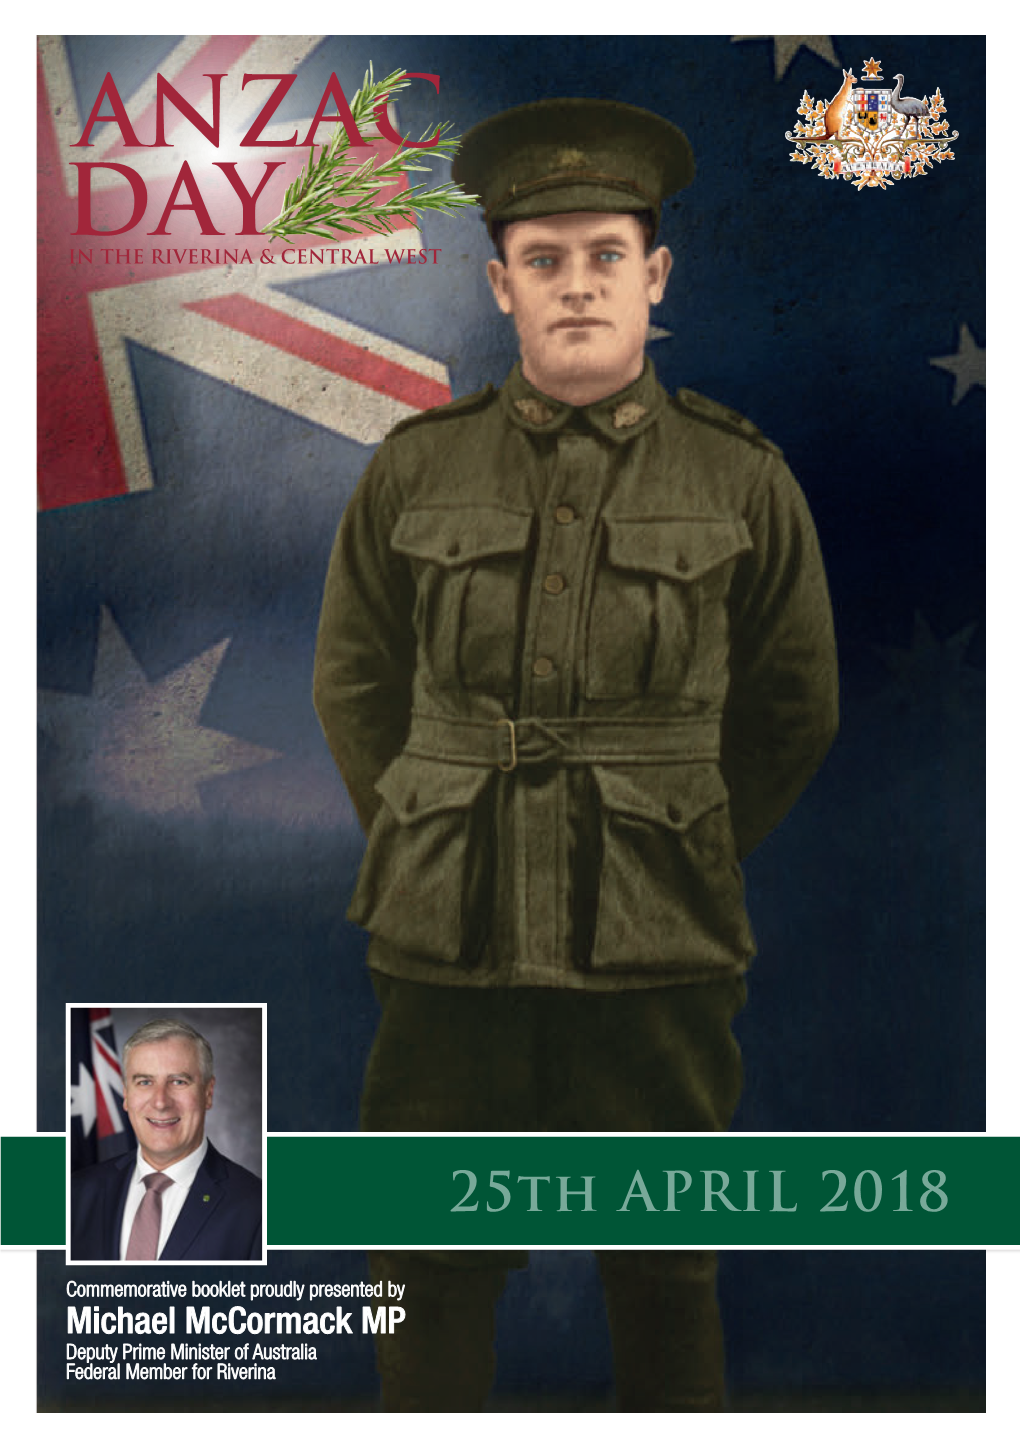 Anzac Day in the Riverina & Central West